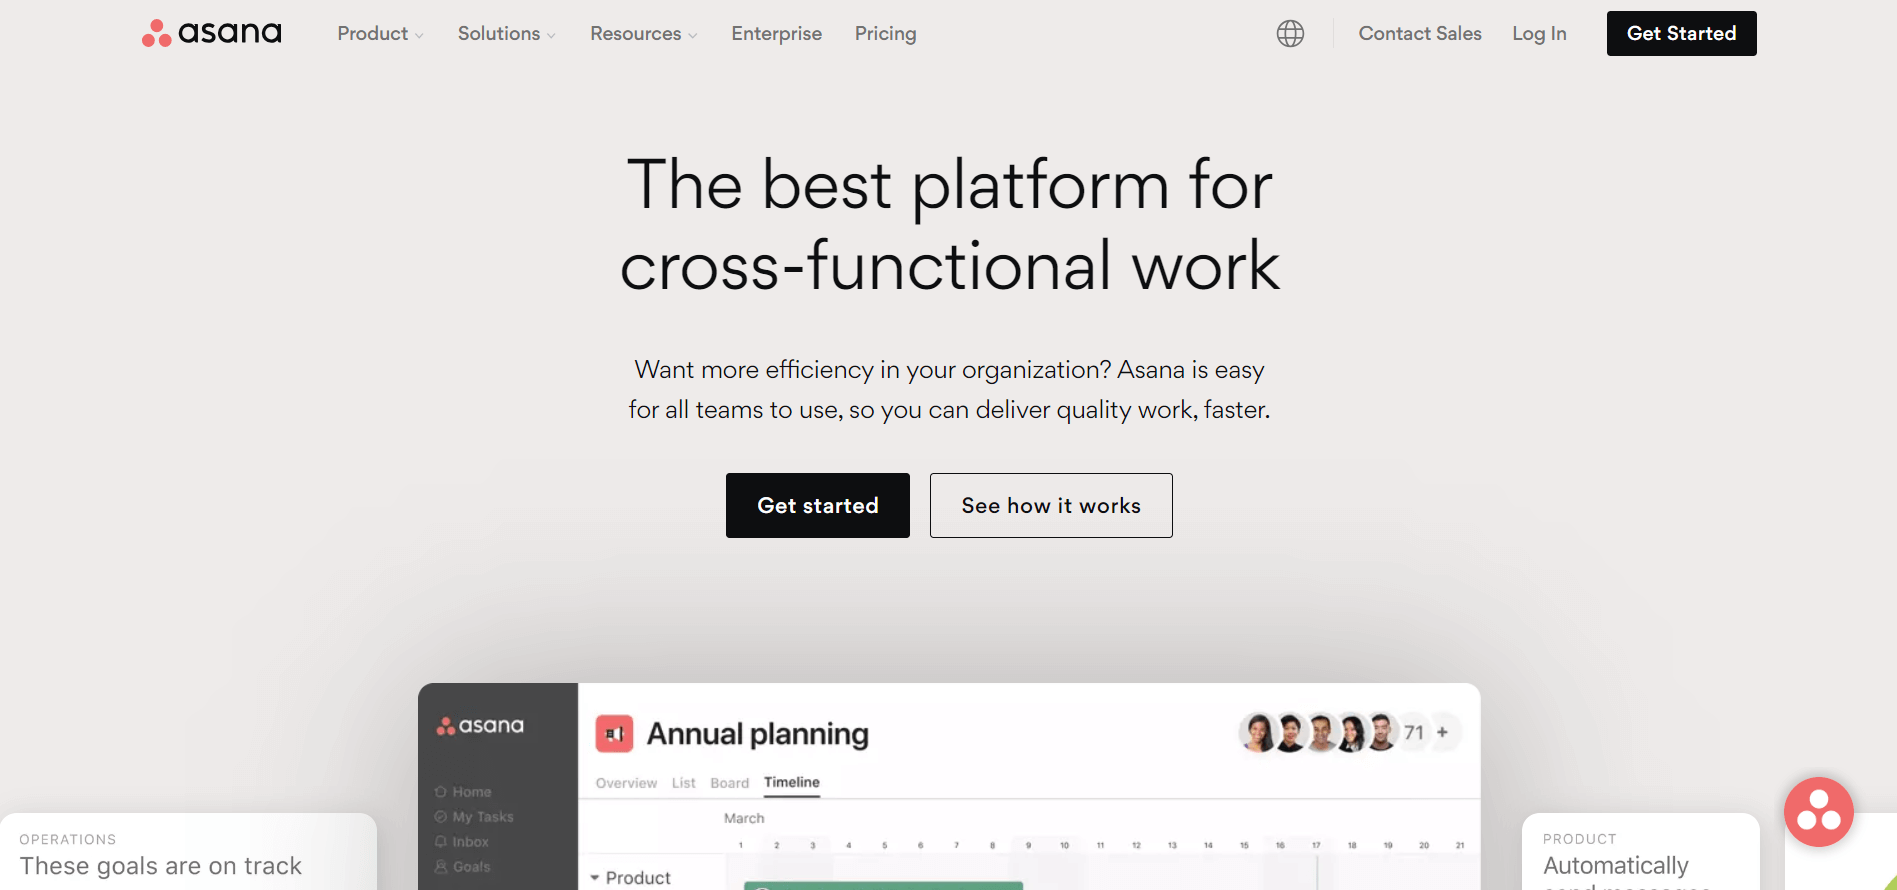 Asana simple homepage showing the motto "The best platform for cross-functional work"